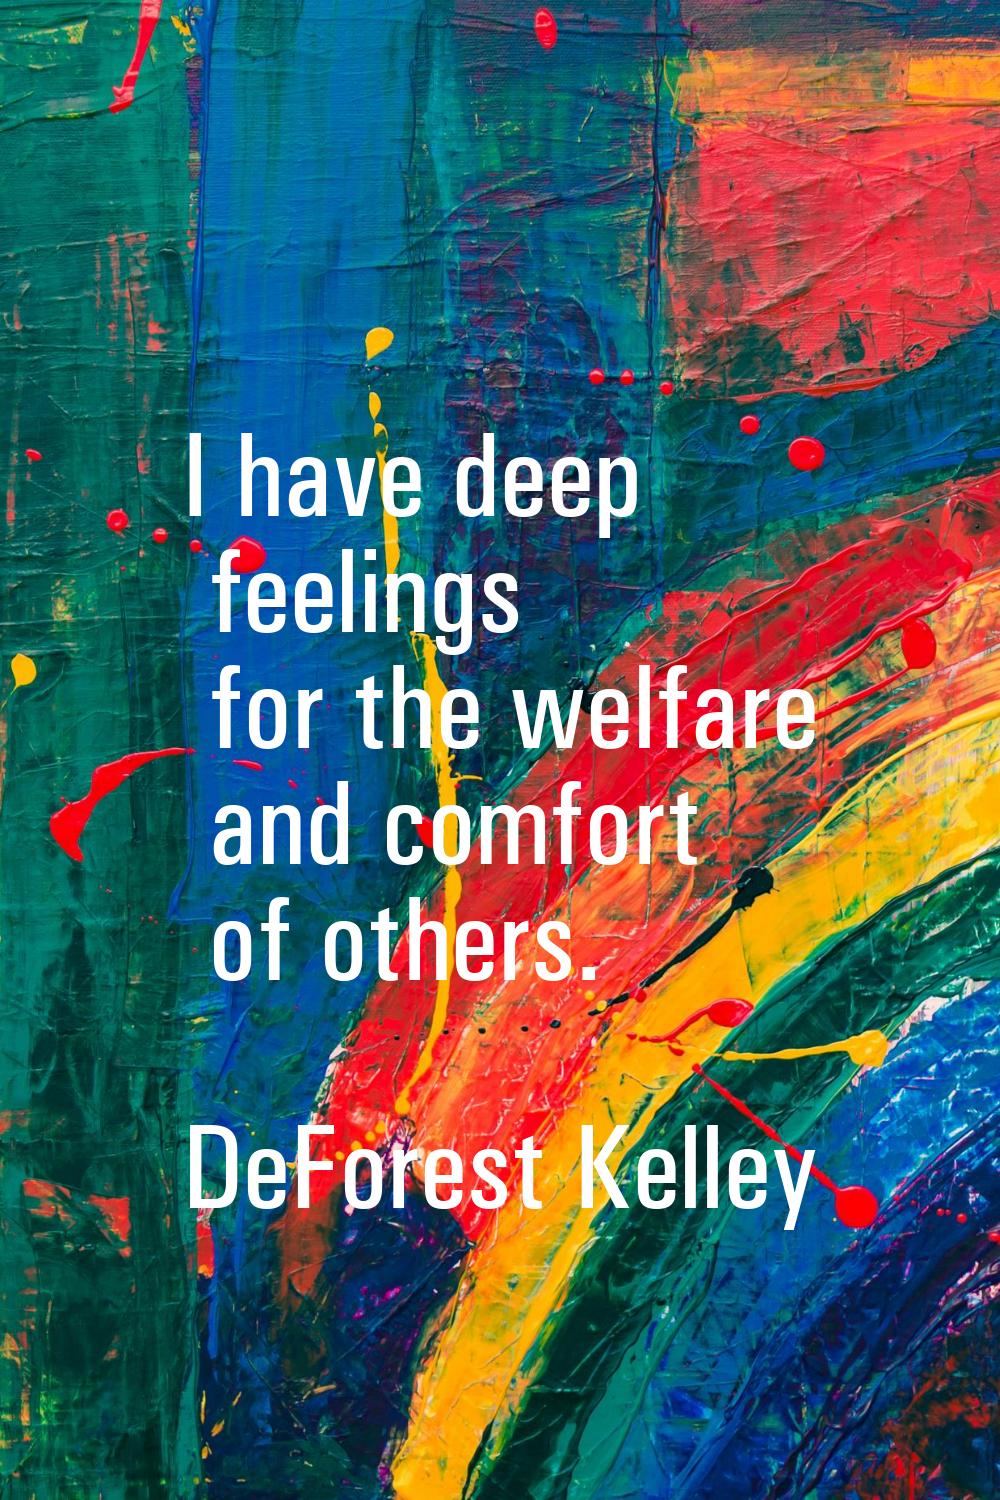 I have deep feelings for the welfare and comfort of others.